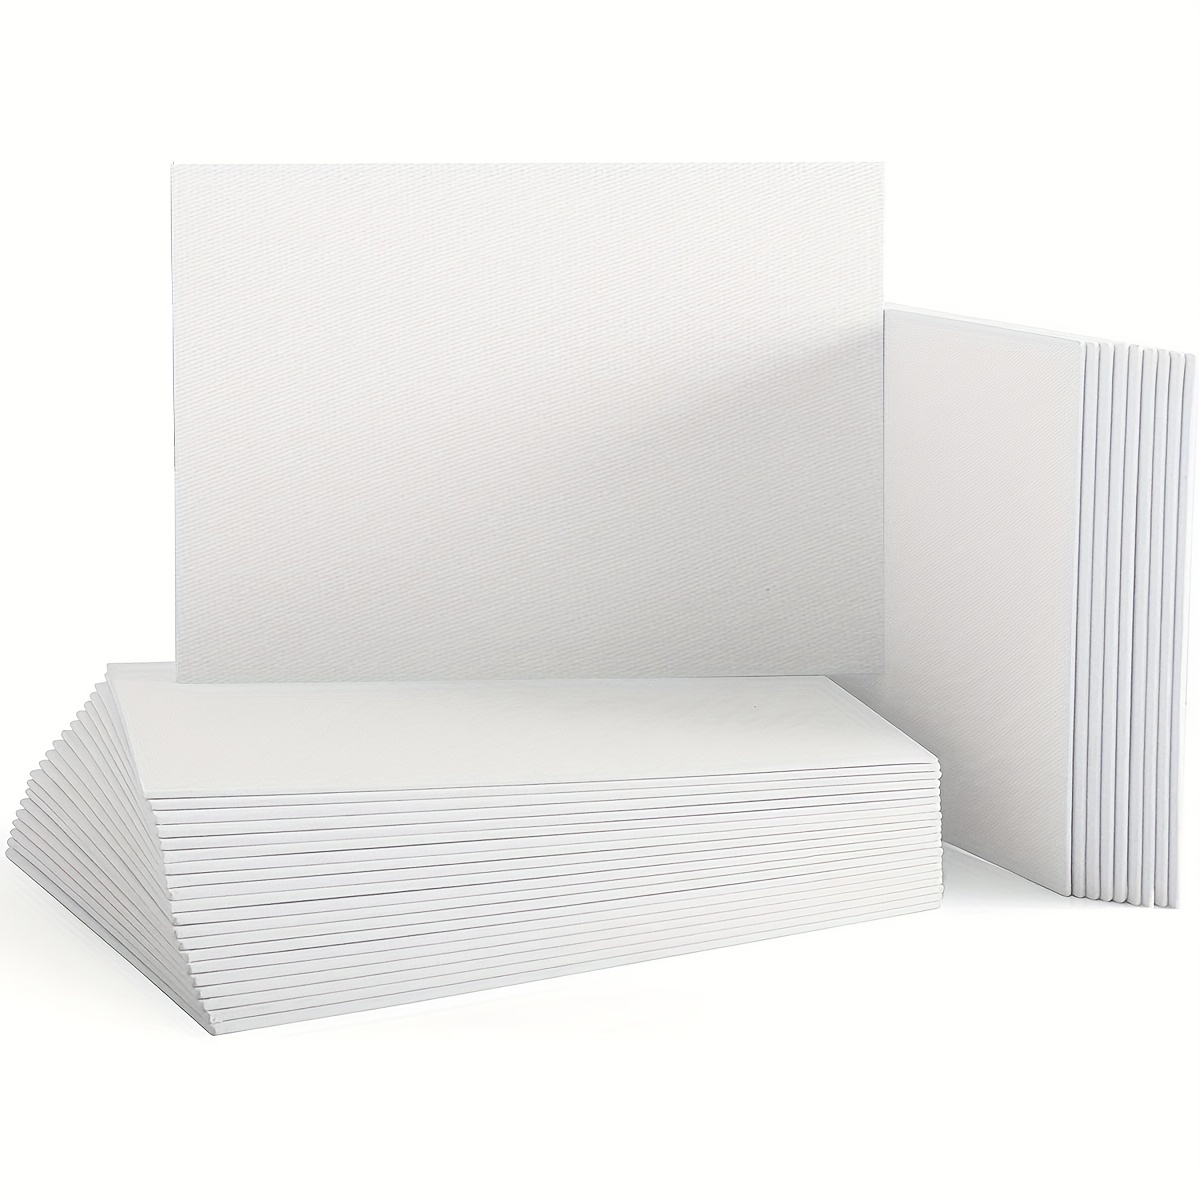 Canvas Panels 12 Pack 8x10 inch, 100% Cotton 12.3 oz Triple Primed Canvases for Painting, Acid-Free Flat Thin Canvas Blank Art Canvas Boards for